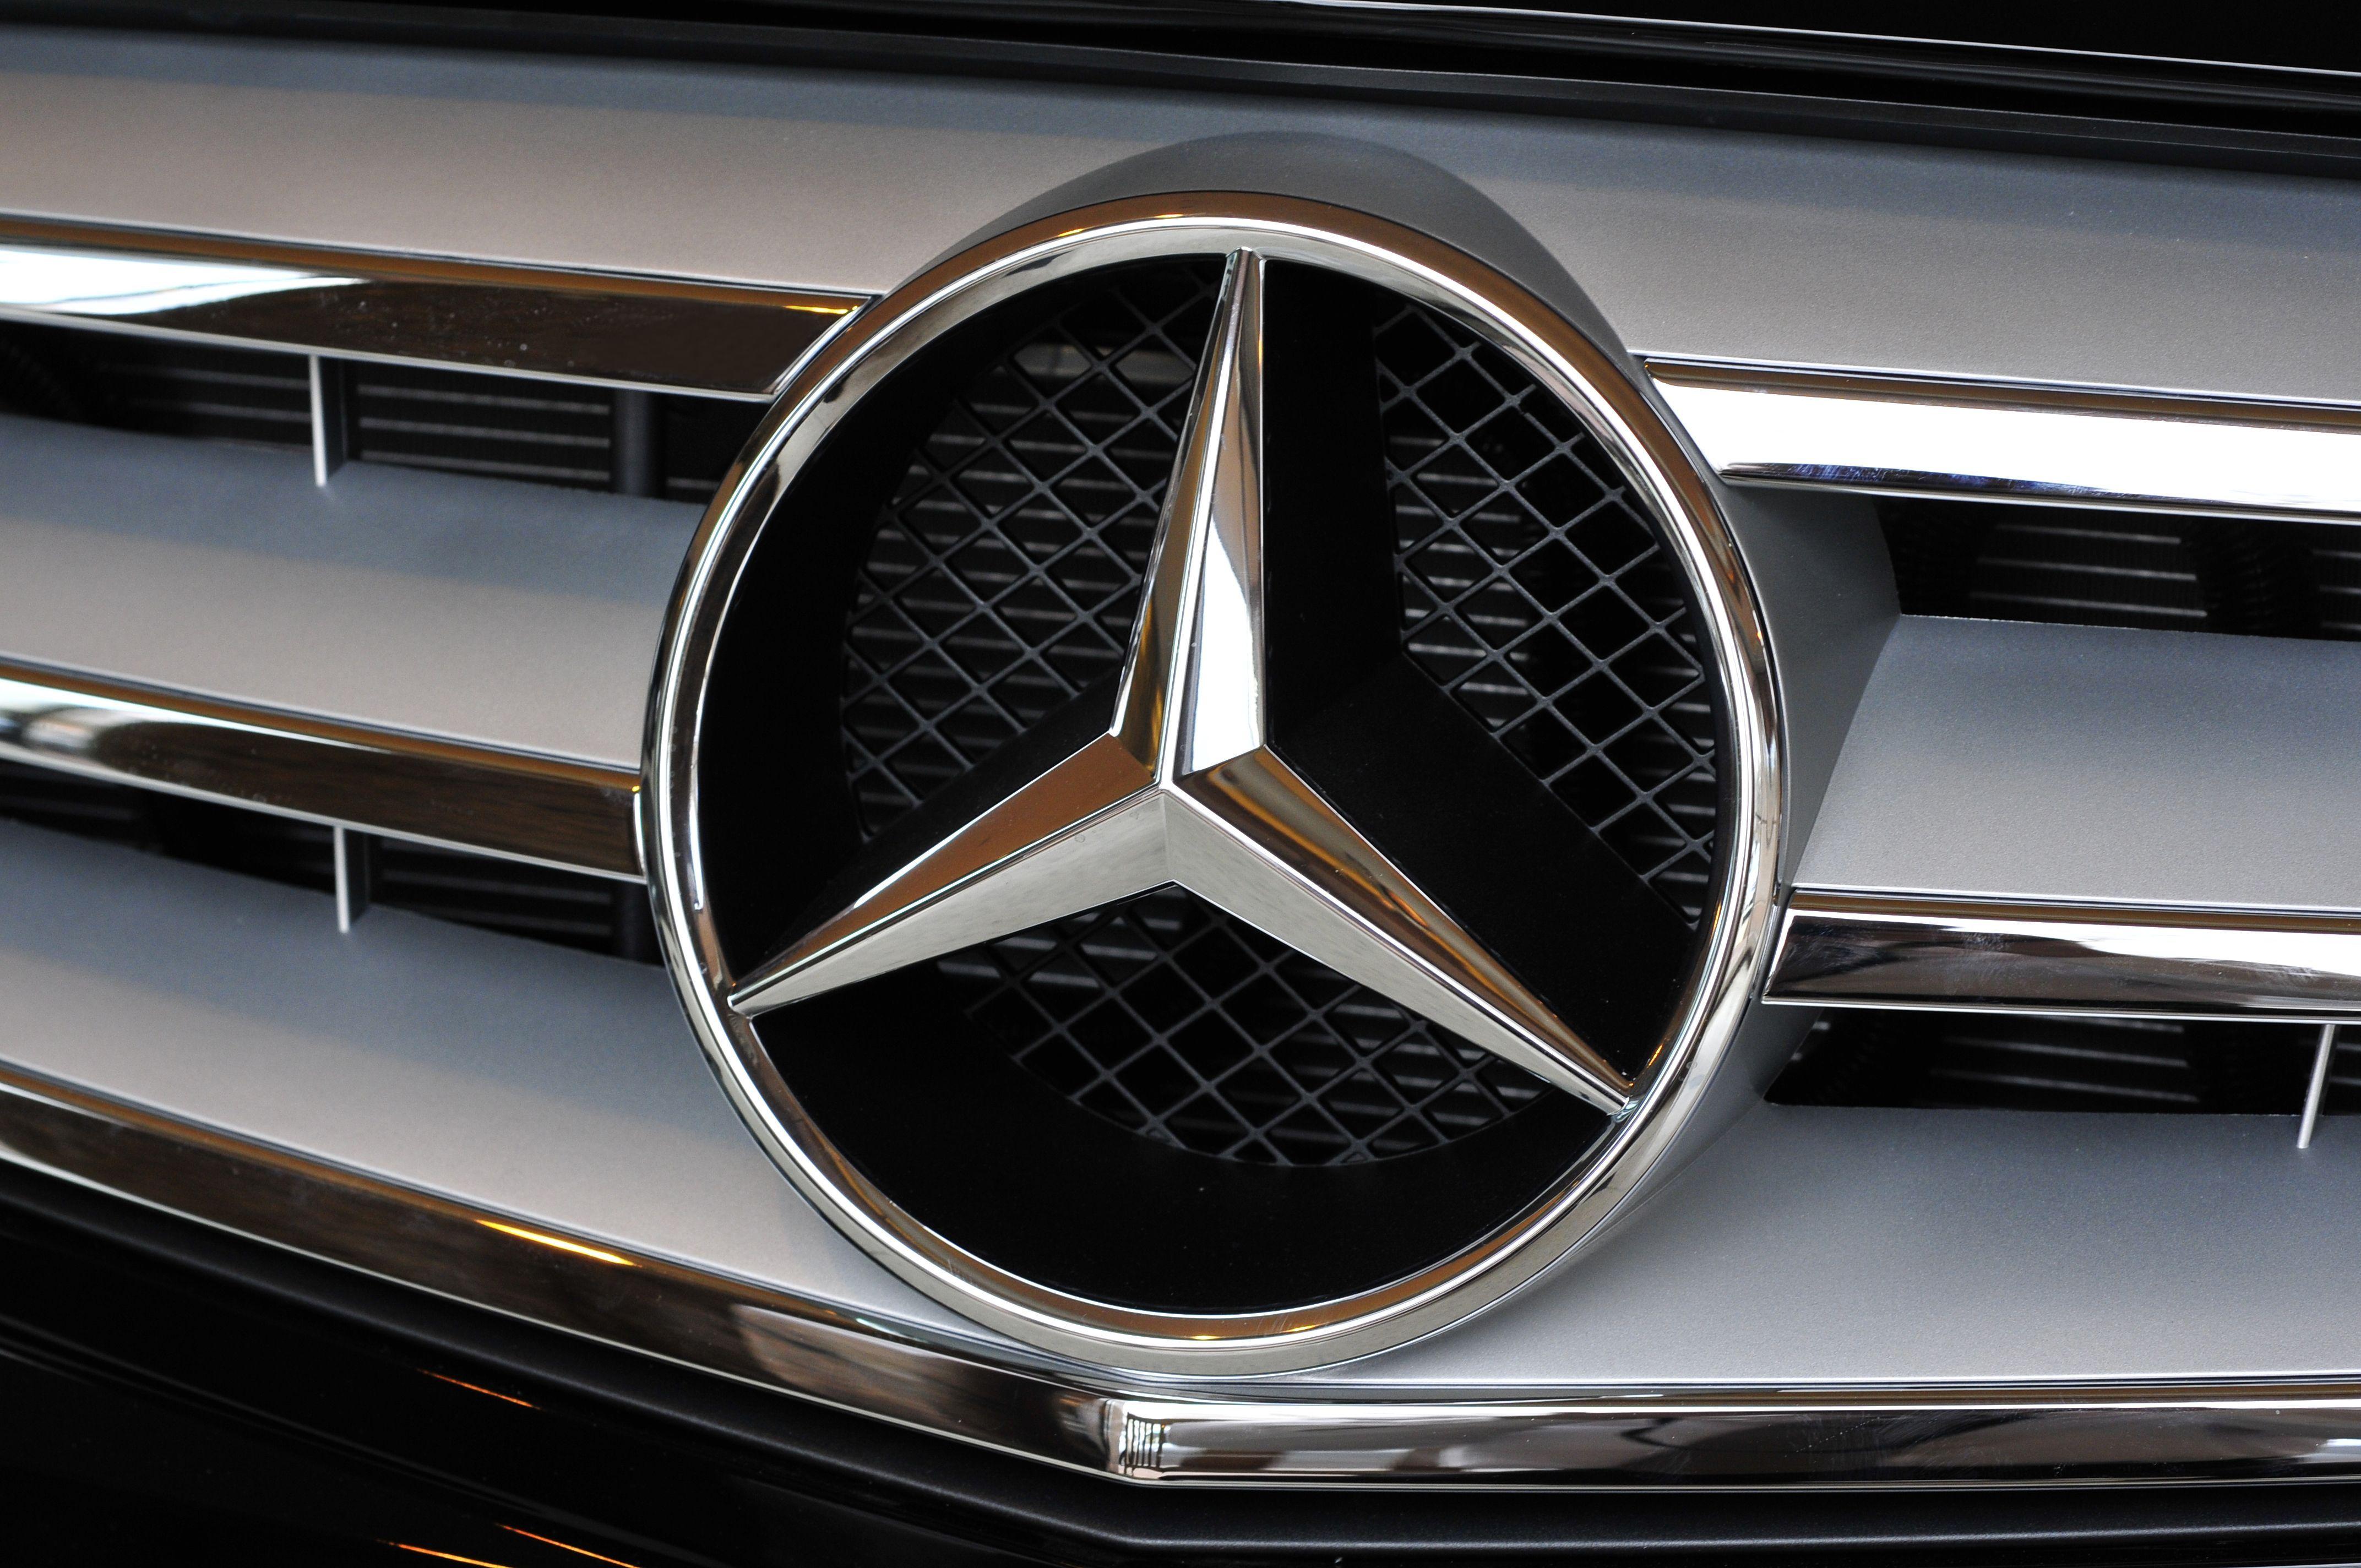 Pointed C Logo - Mercedes Benz 3 Pointed Star On The W204 C Class. Stars, Emblems